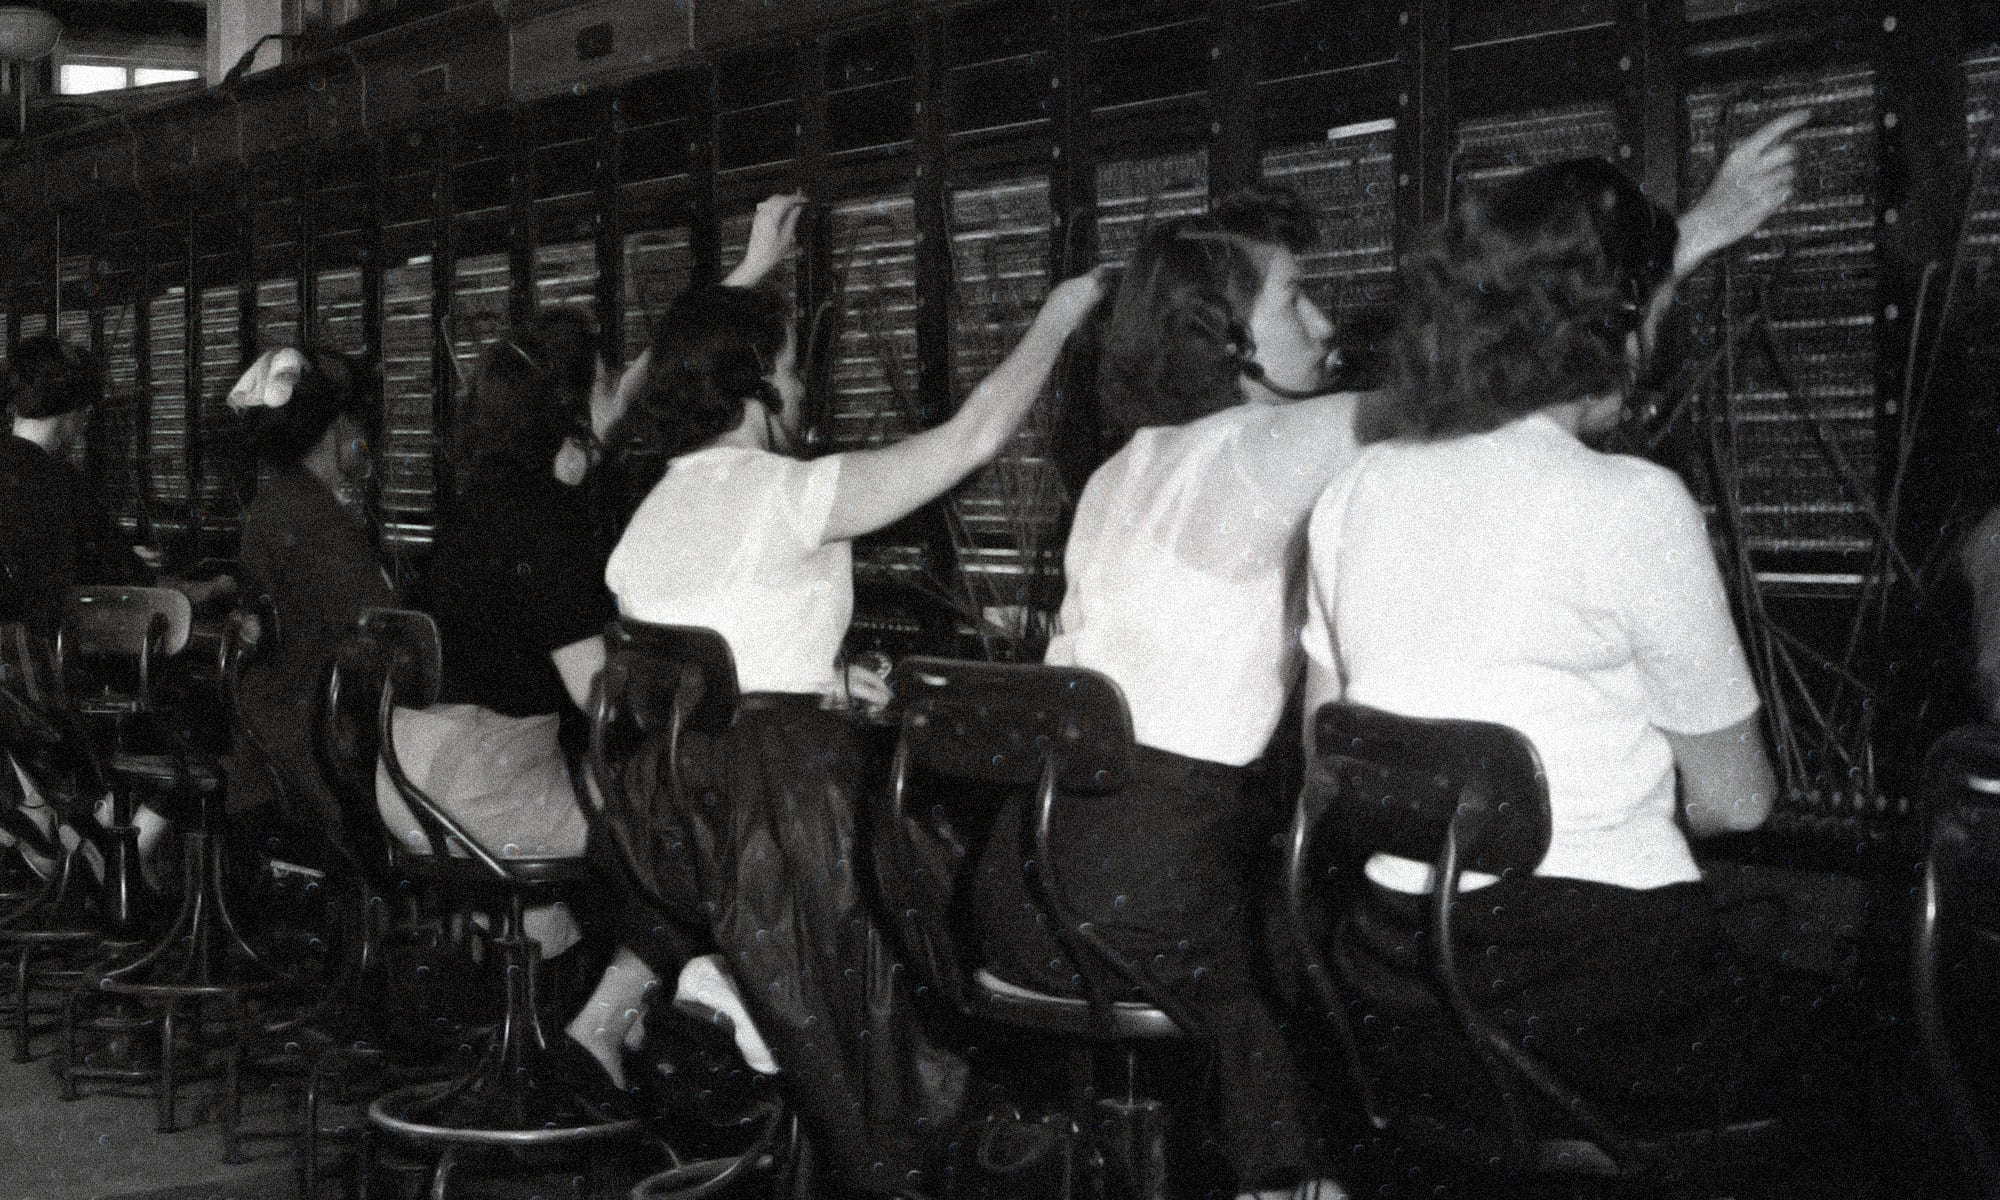 Telephone switchboard operators from the 1950's.